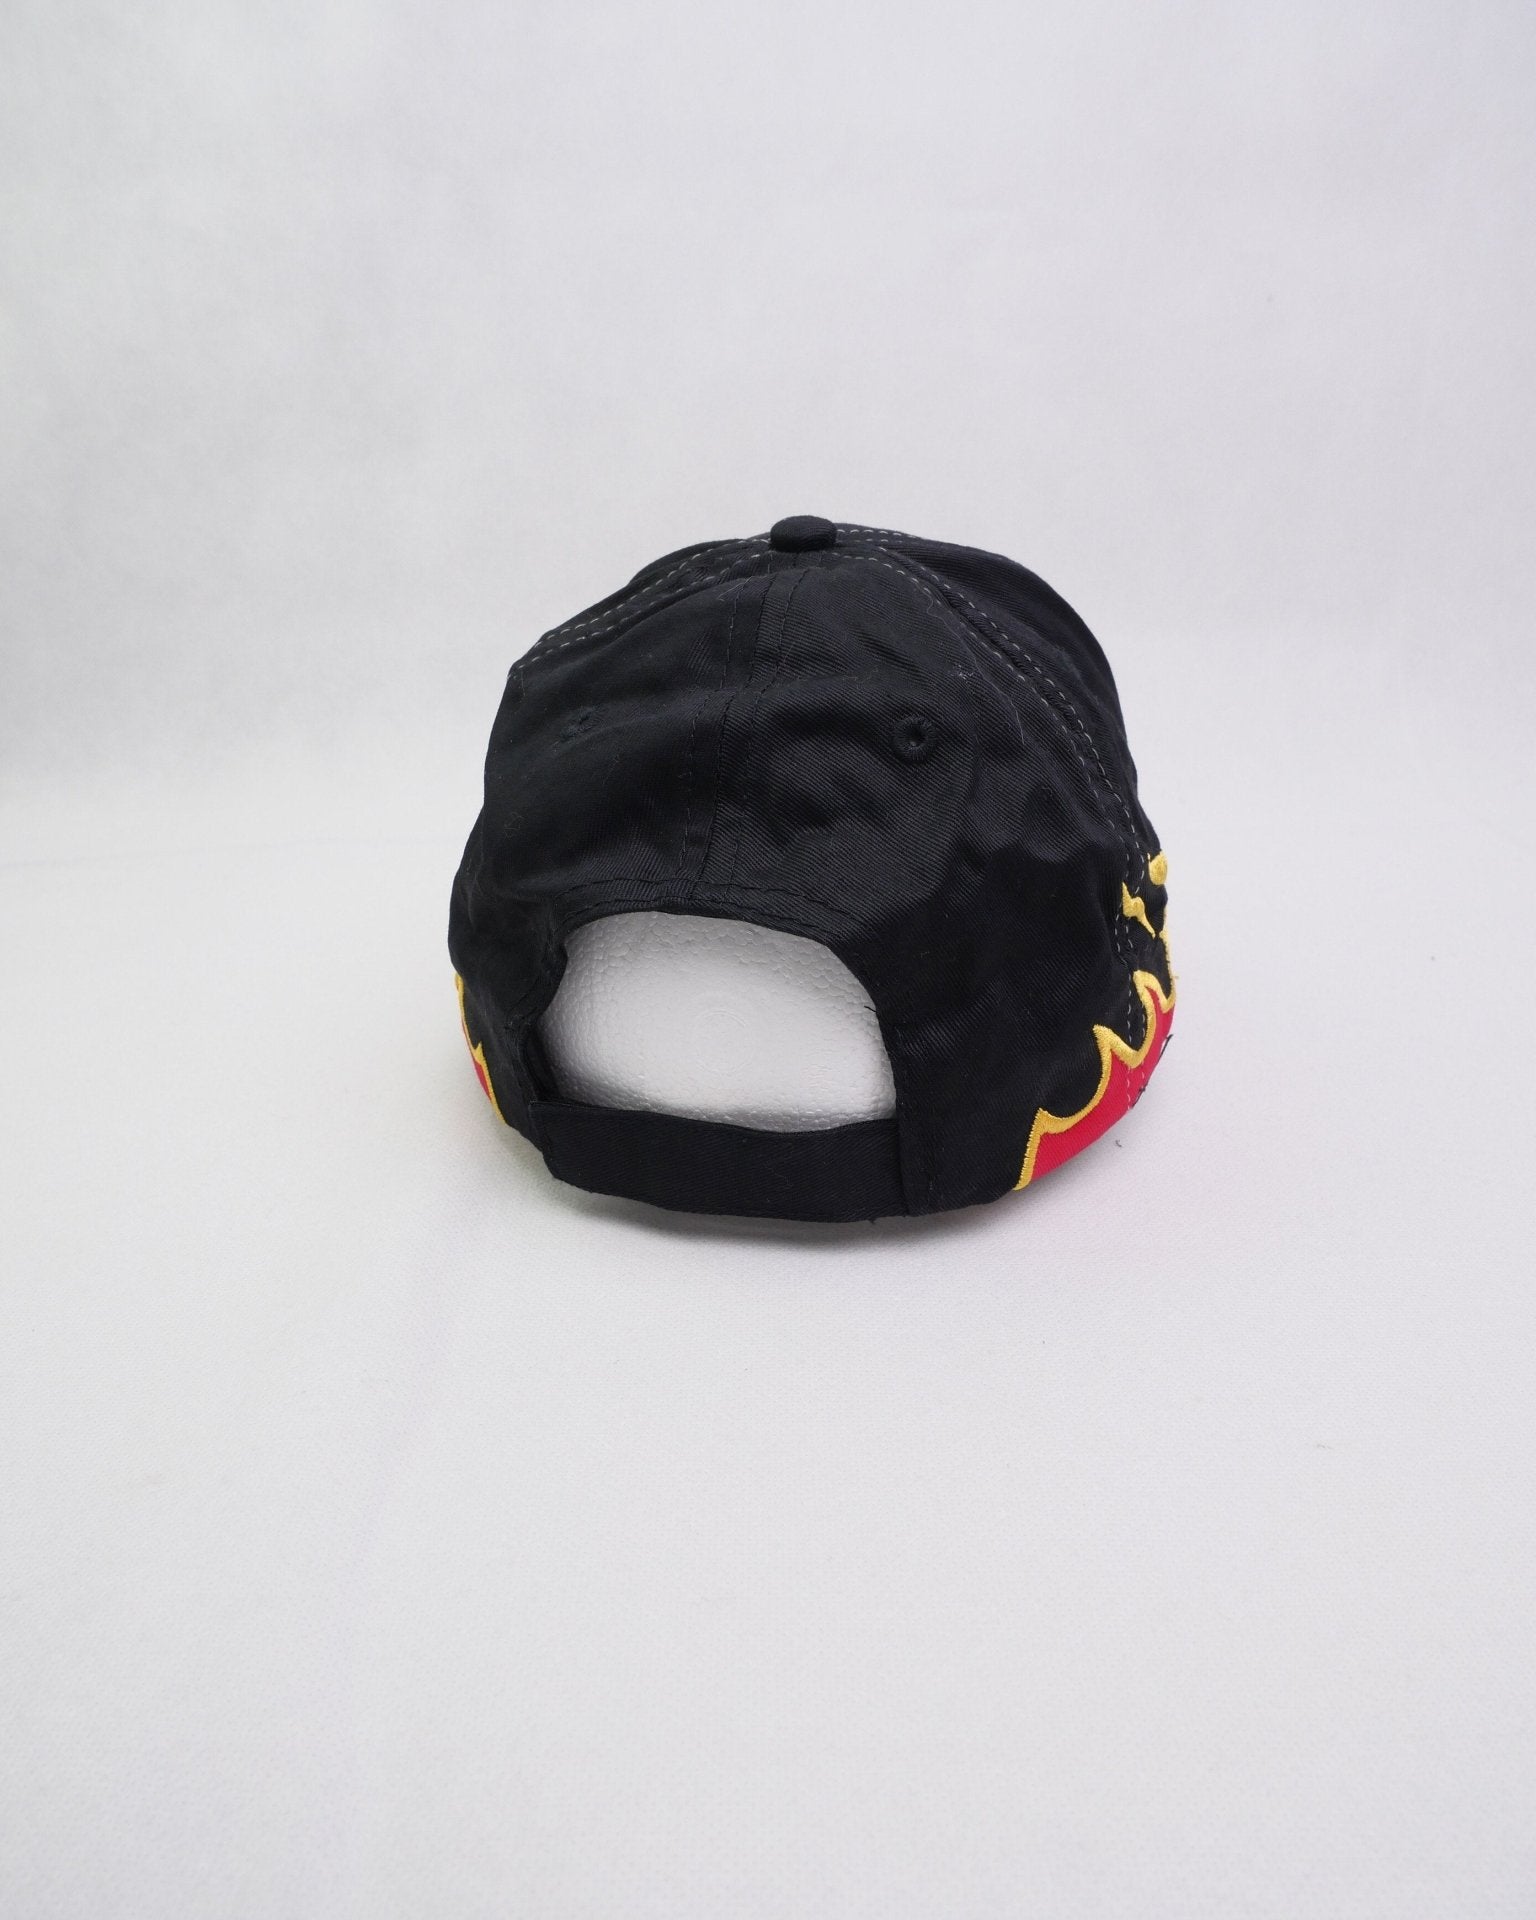 'Fire' embroidered Graphic three toned Cap Accessoire - Peeces